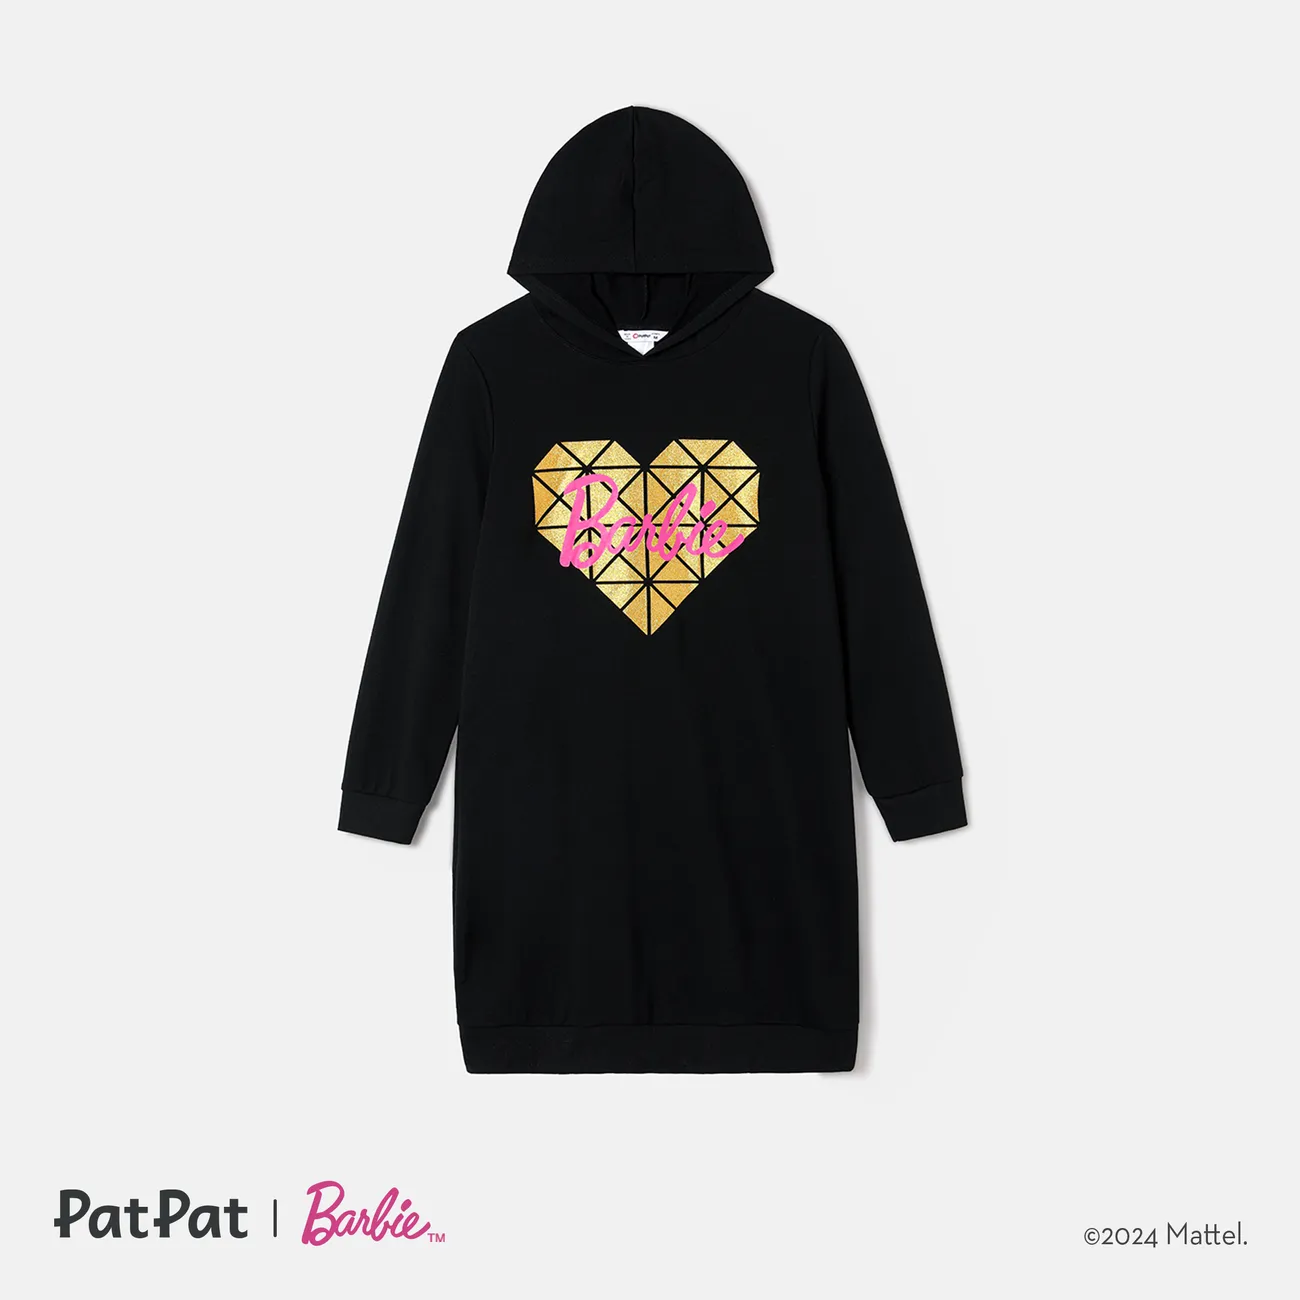 Barbie Mommy and Me Letter Heart Graphic Long-sleeve Hooded Sweatshirt Dress Black big image 1